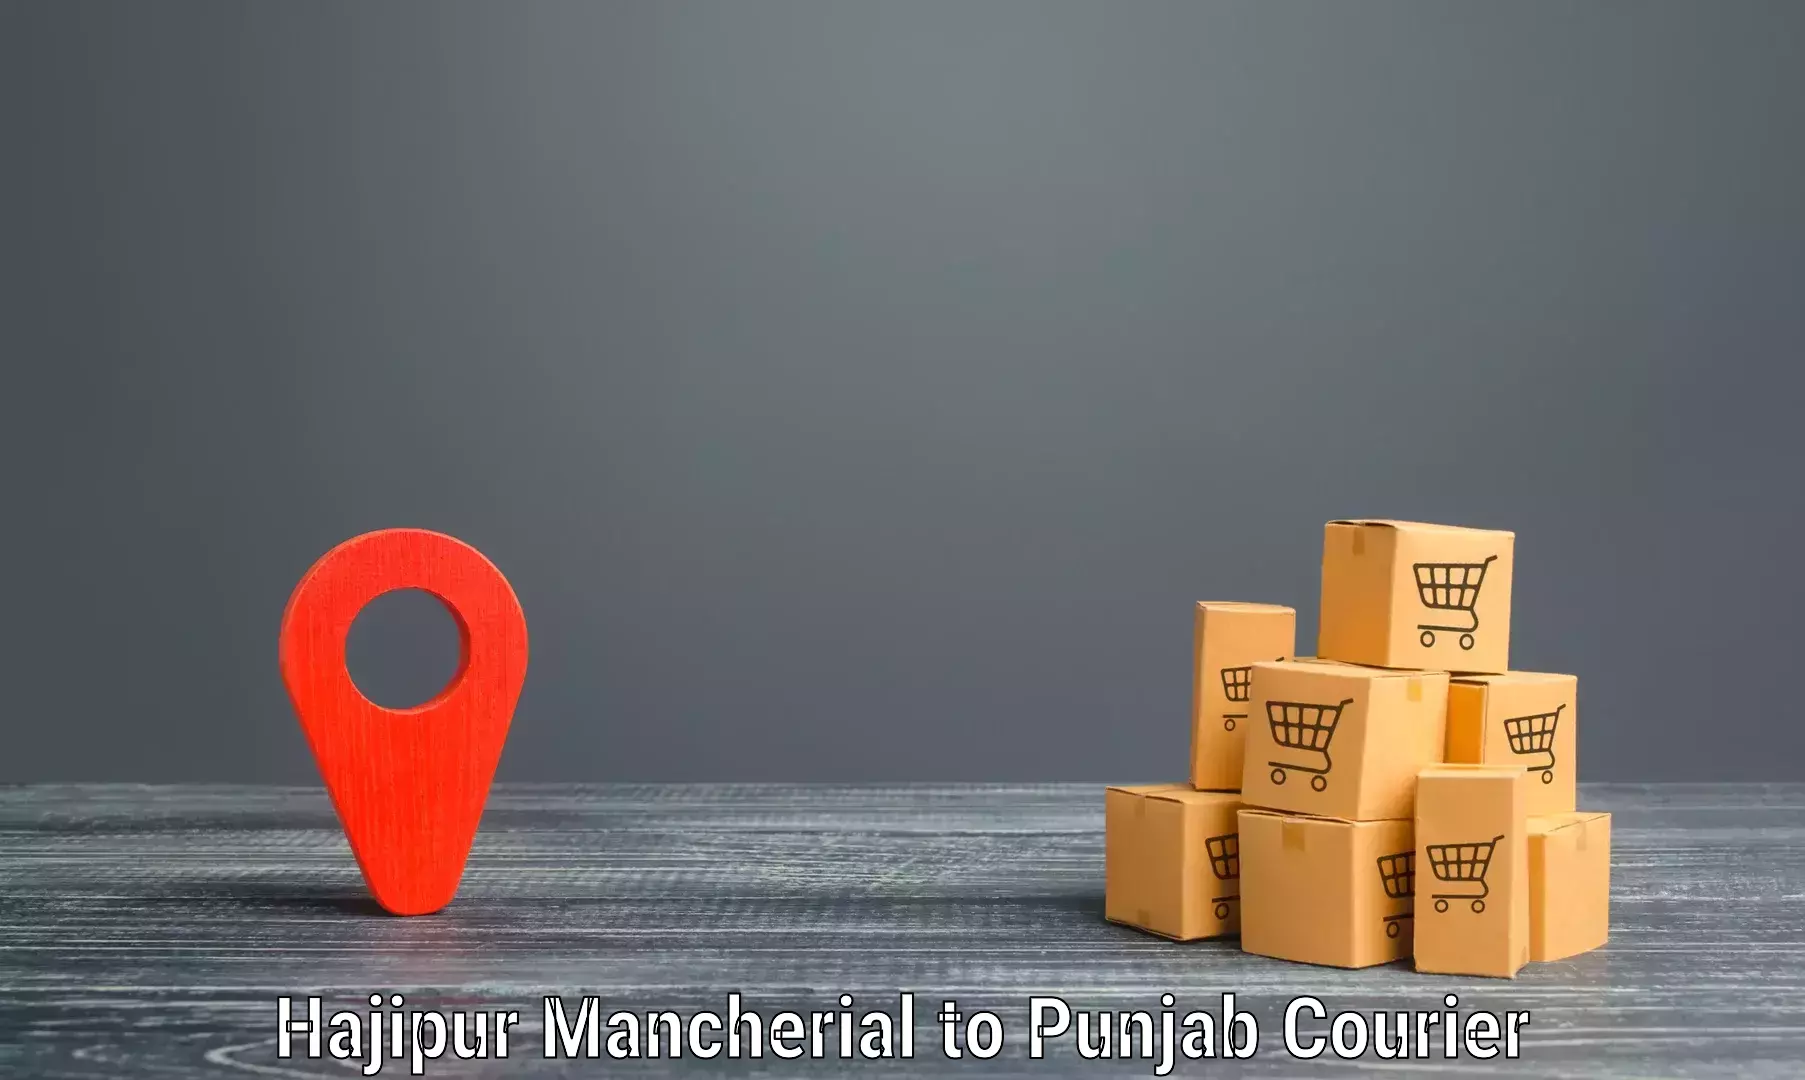 Easy access courier services Hajipur Mancherial to Faridkot